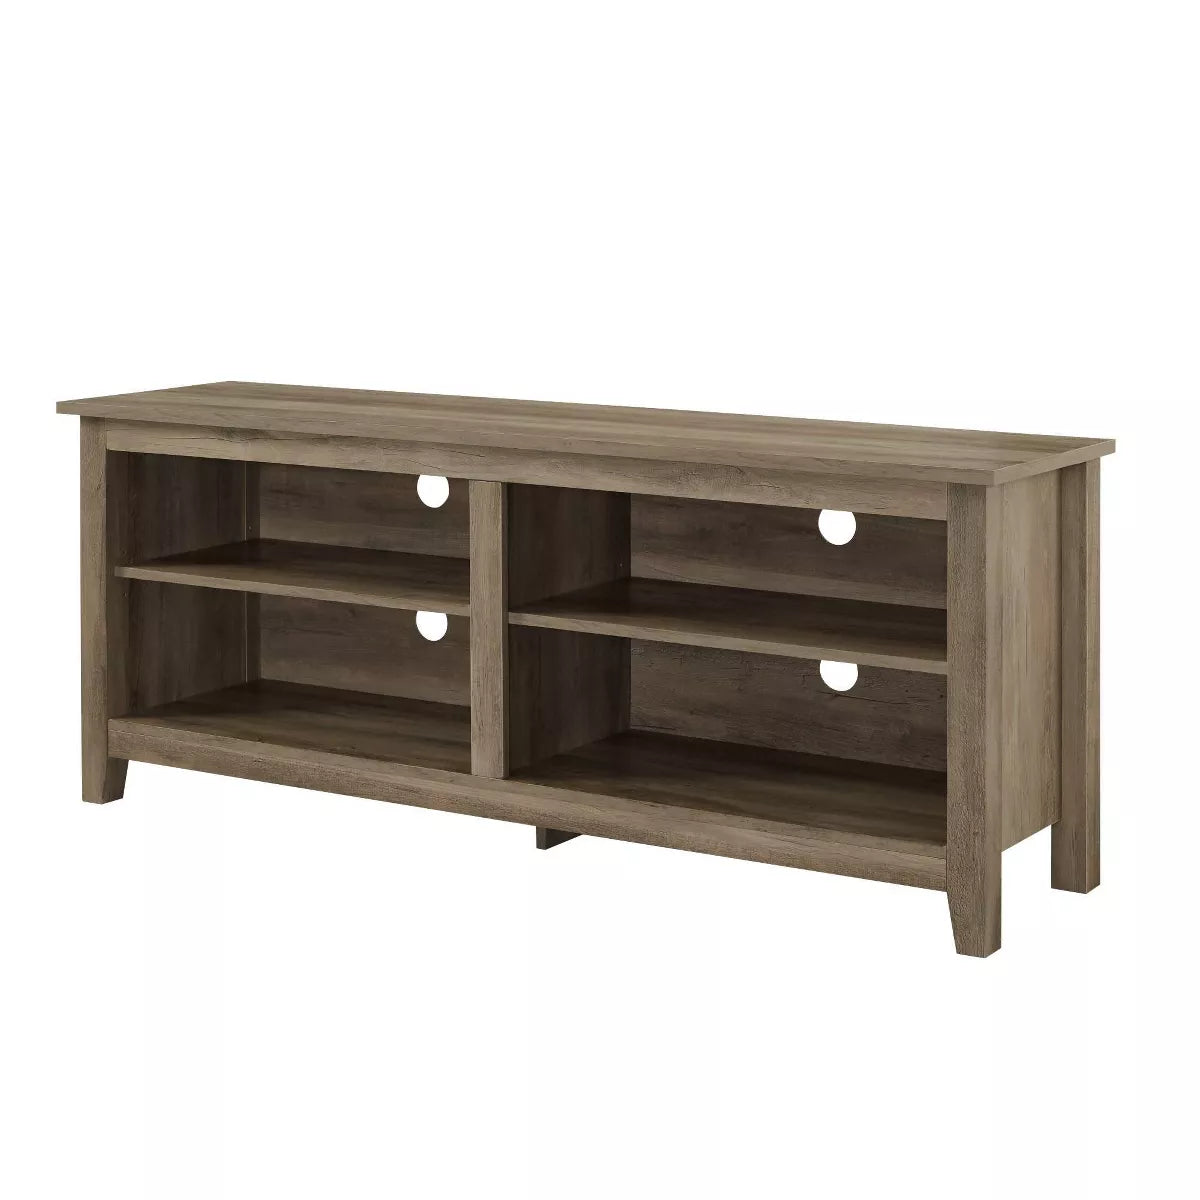 Transitional 4 Cubby Wood Open Storage TV Stand for TVs up to 65